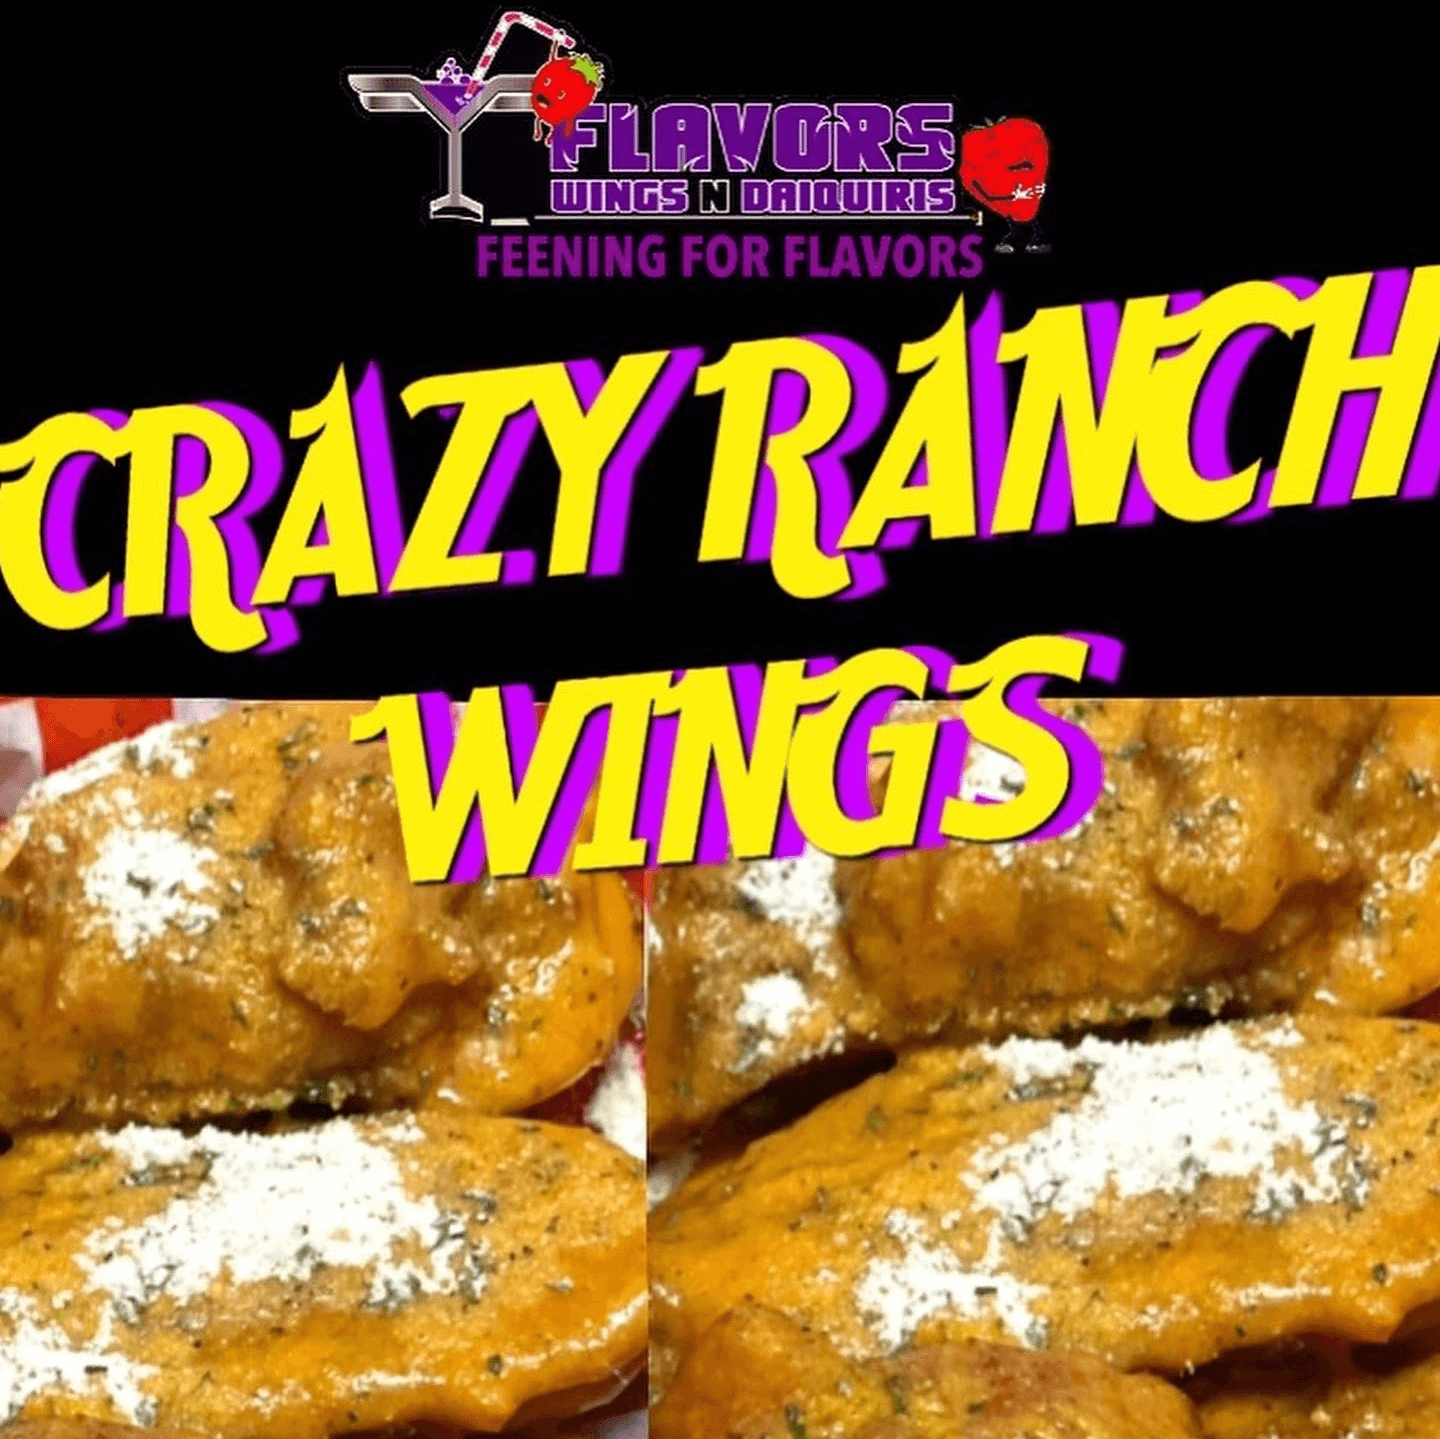 HOME of The CRAZY RANCH WINGS Since September 2019